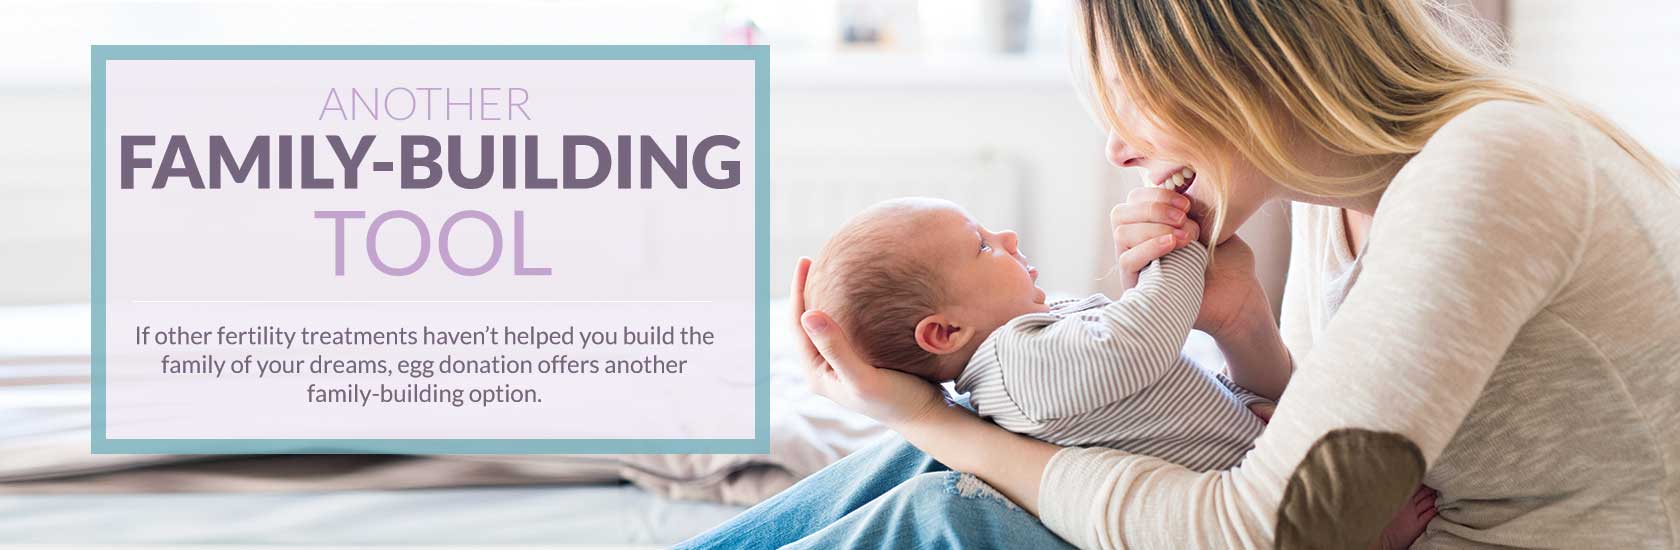 If other fertility treatments haven’t helped you build the family of your dreams, egg donation offers another family-building option.